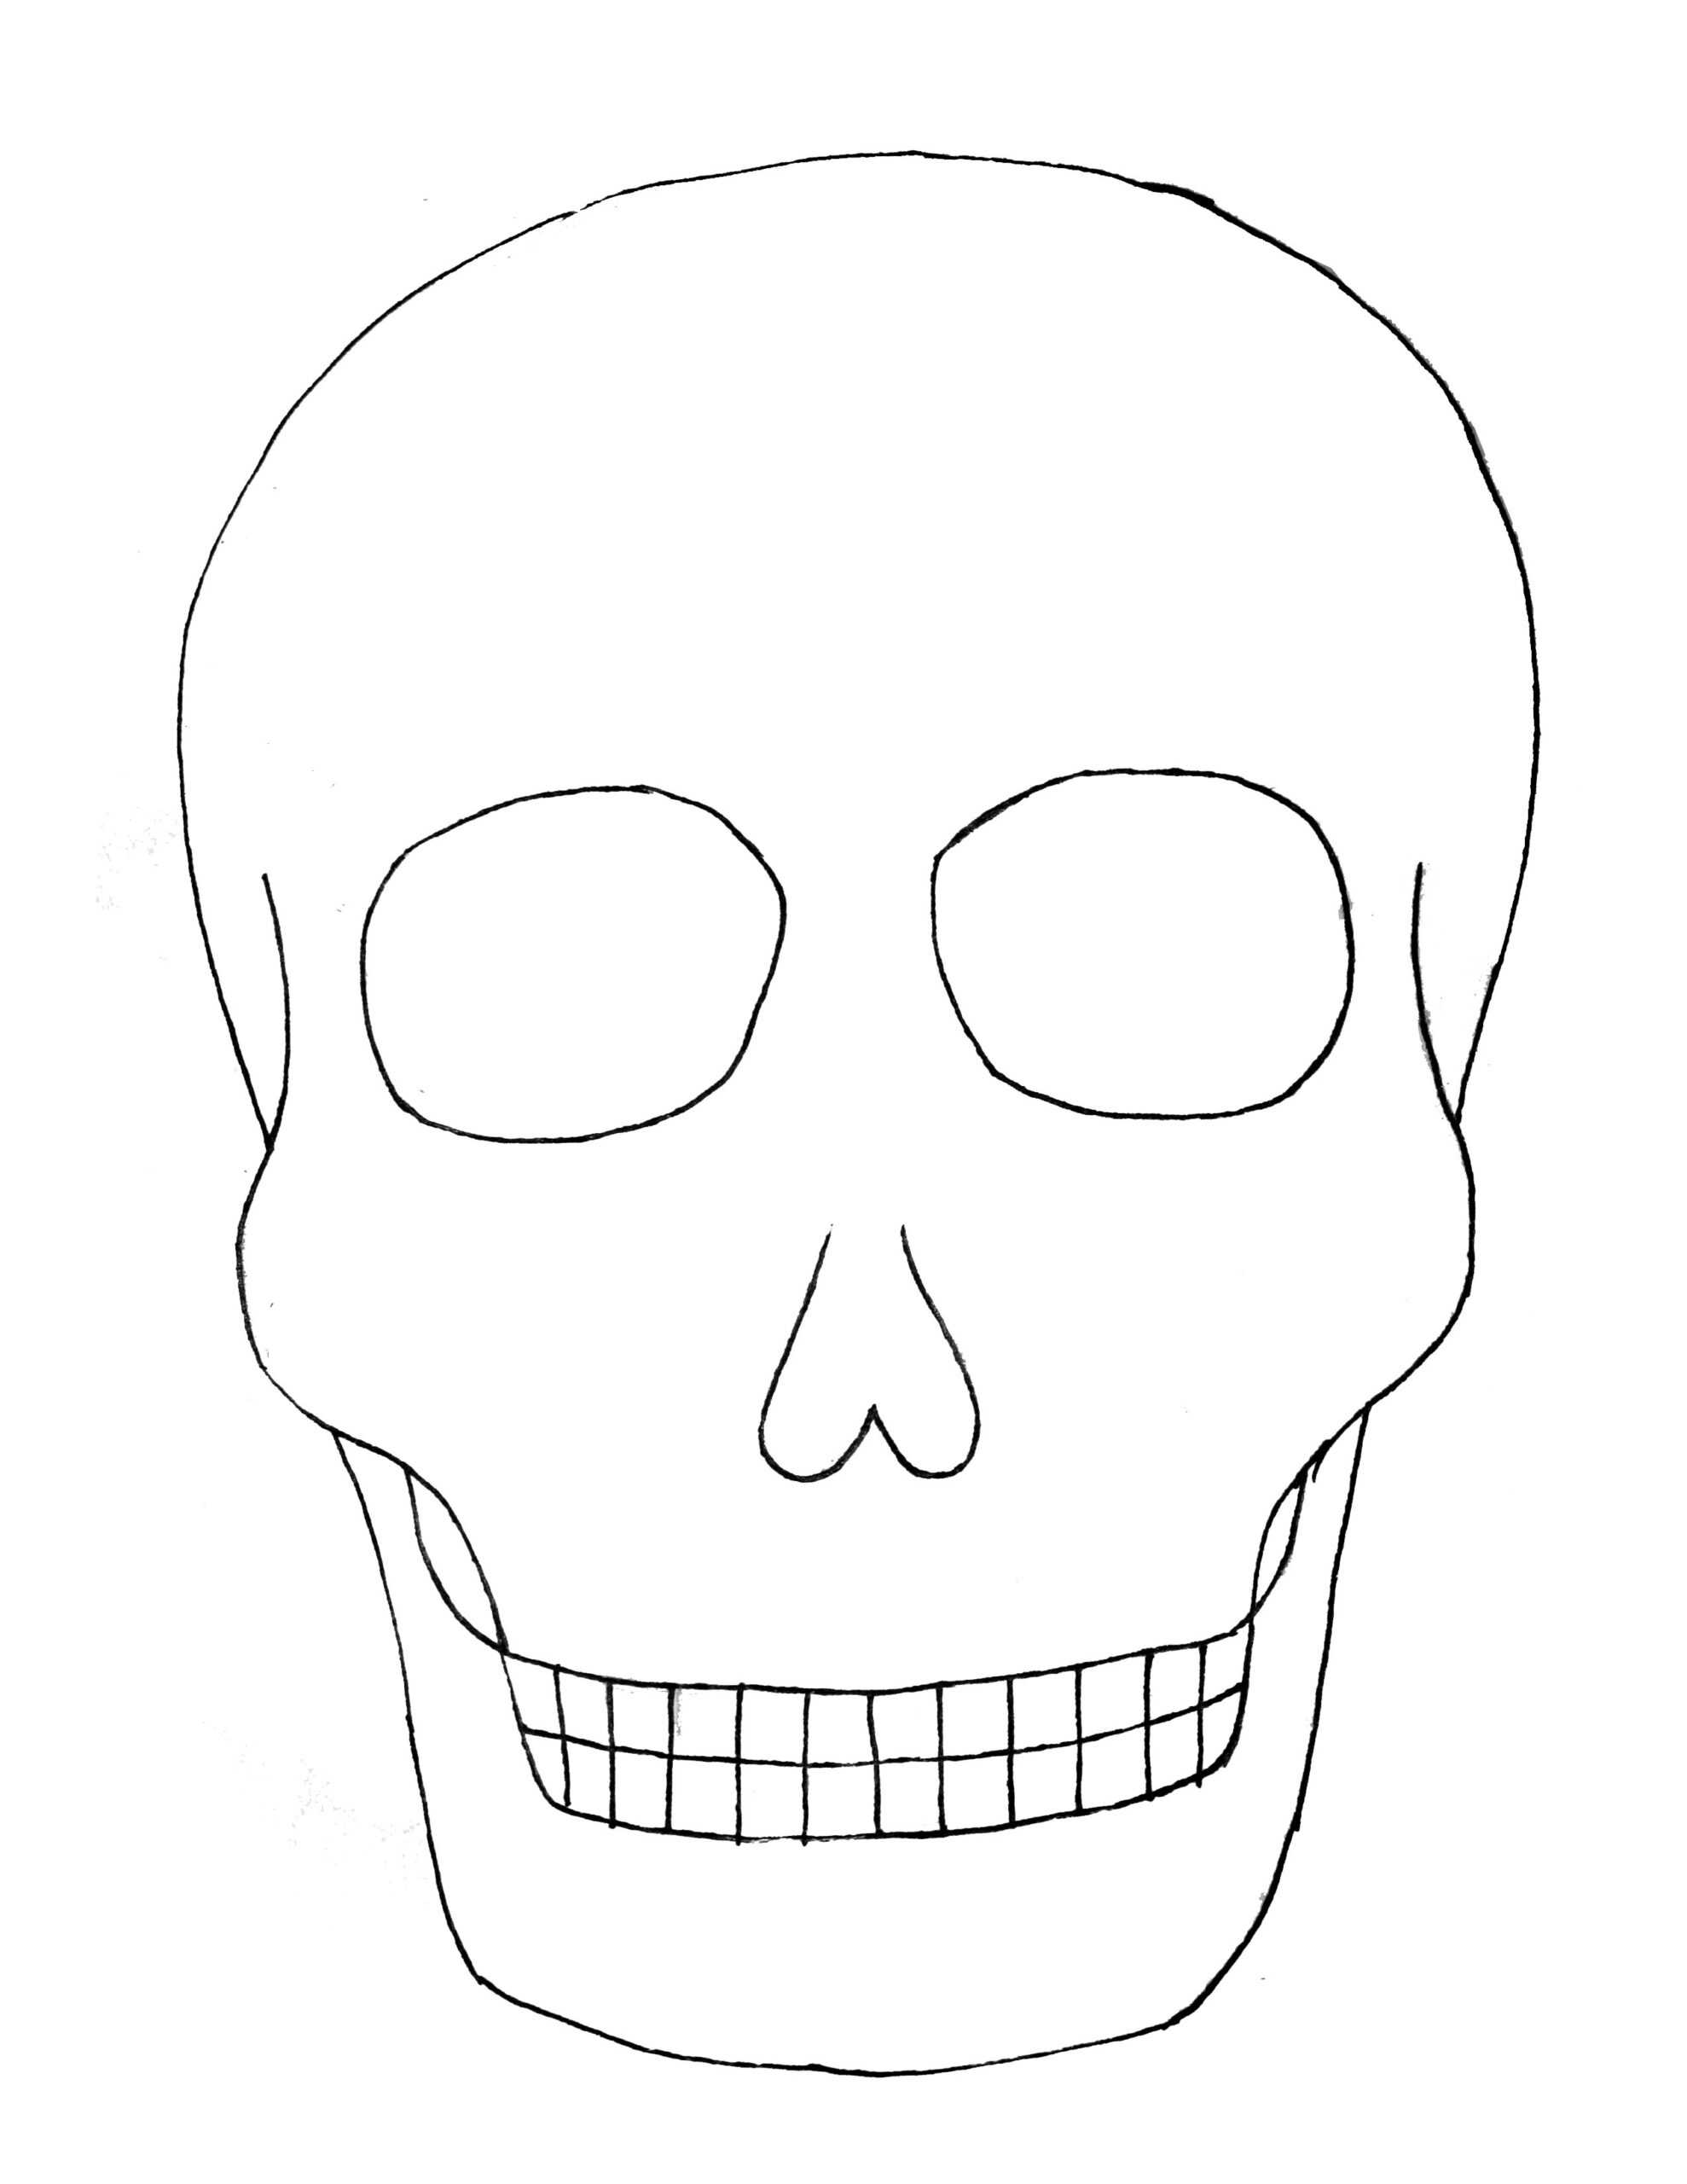 Best Coloring : Day Of The Sugar Skull Blank Template Skulls Inside Blank Sugar Skull Template